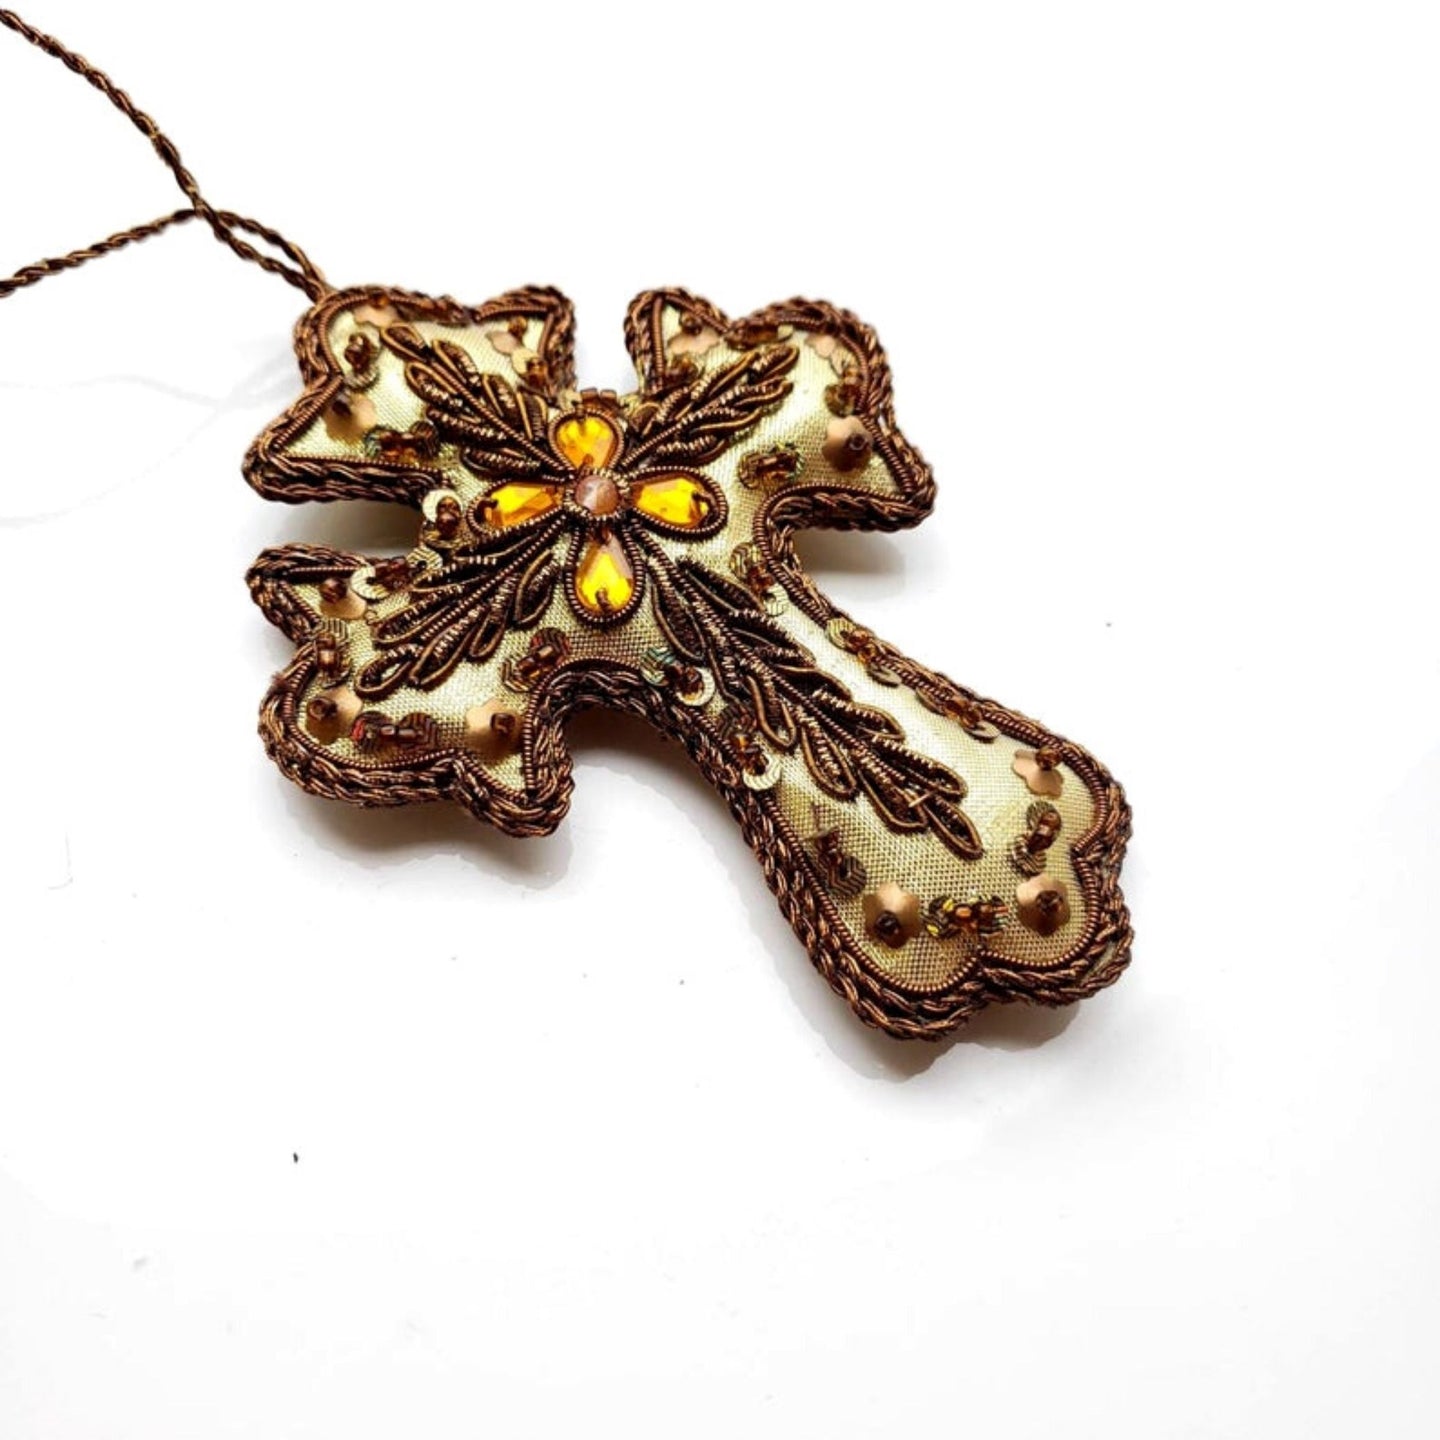 Hand embroidered gold cross hanging ornament.